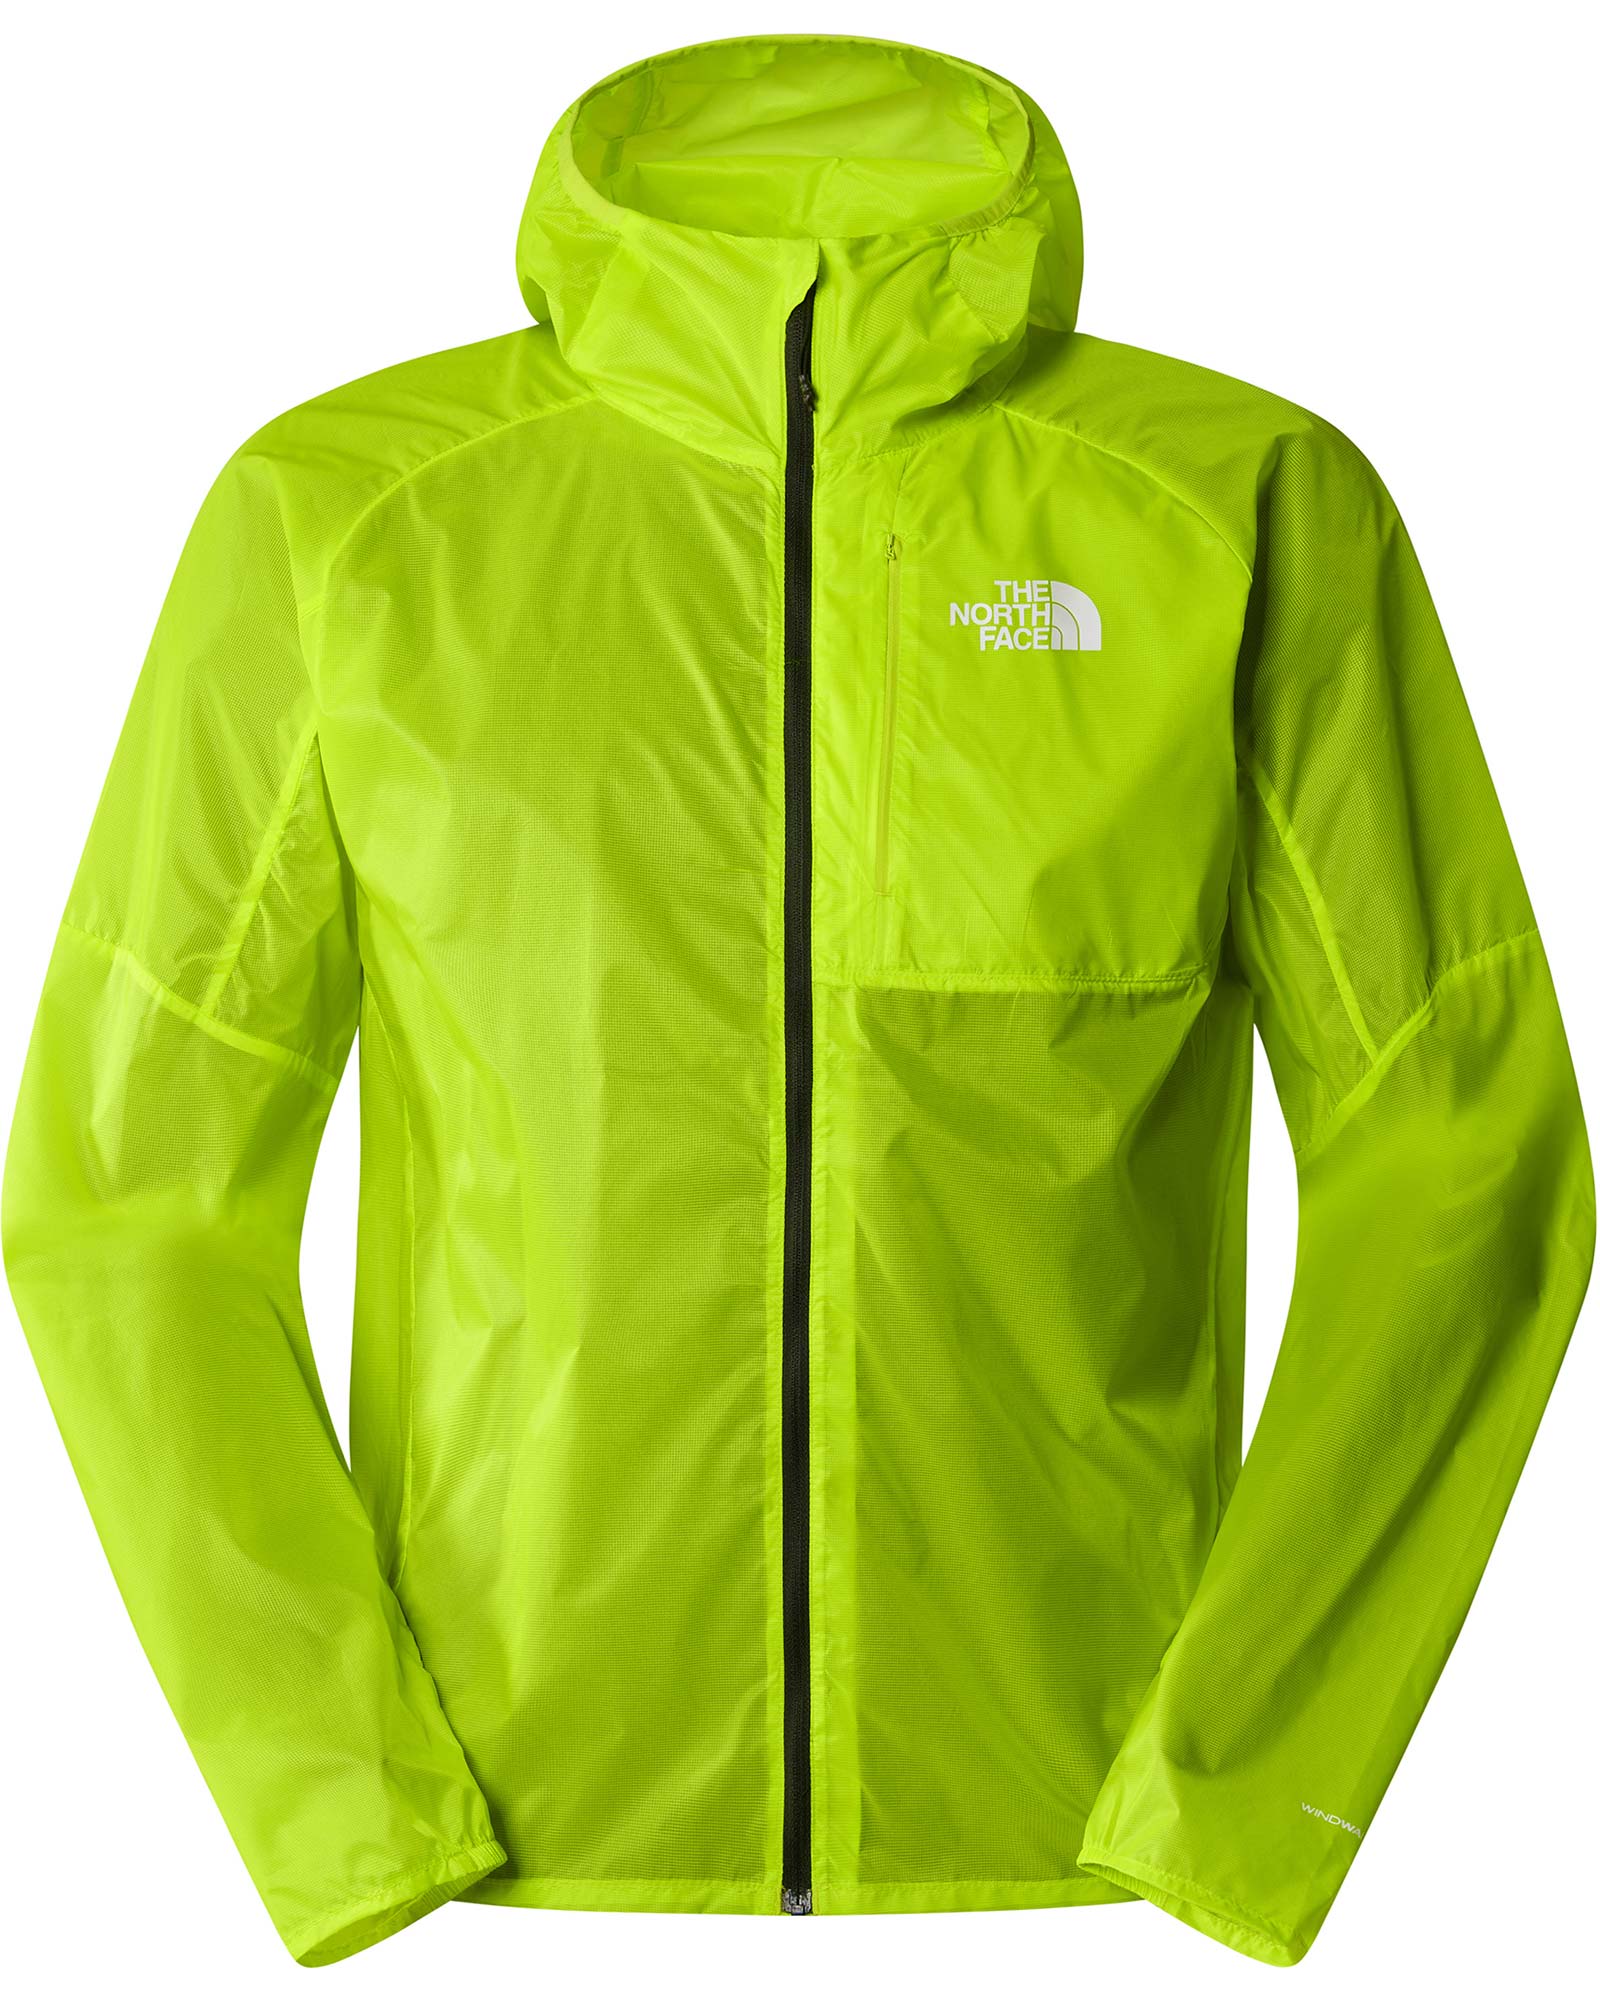 The North Face Men's Windstream Shell Jacket